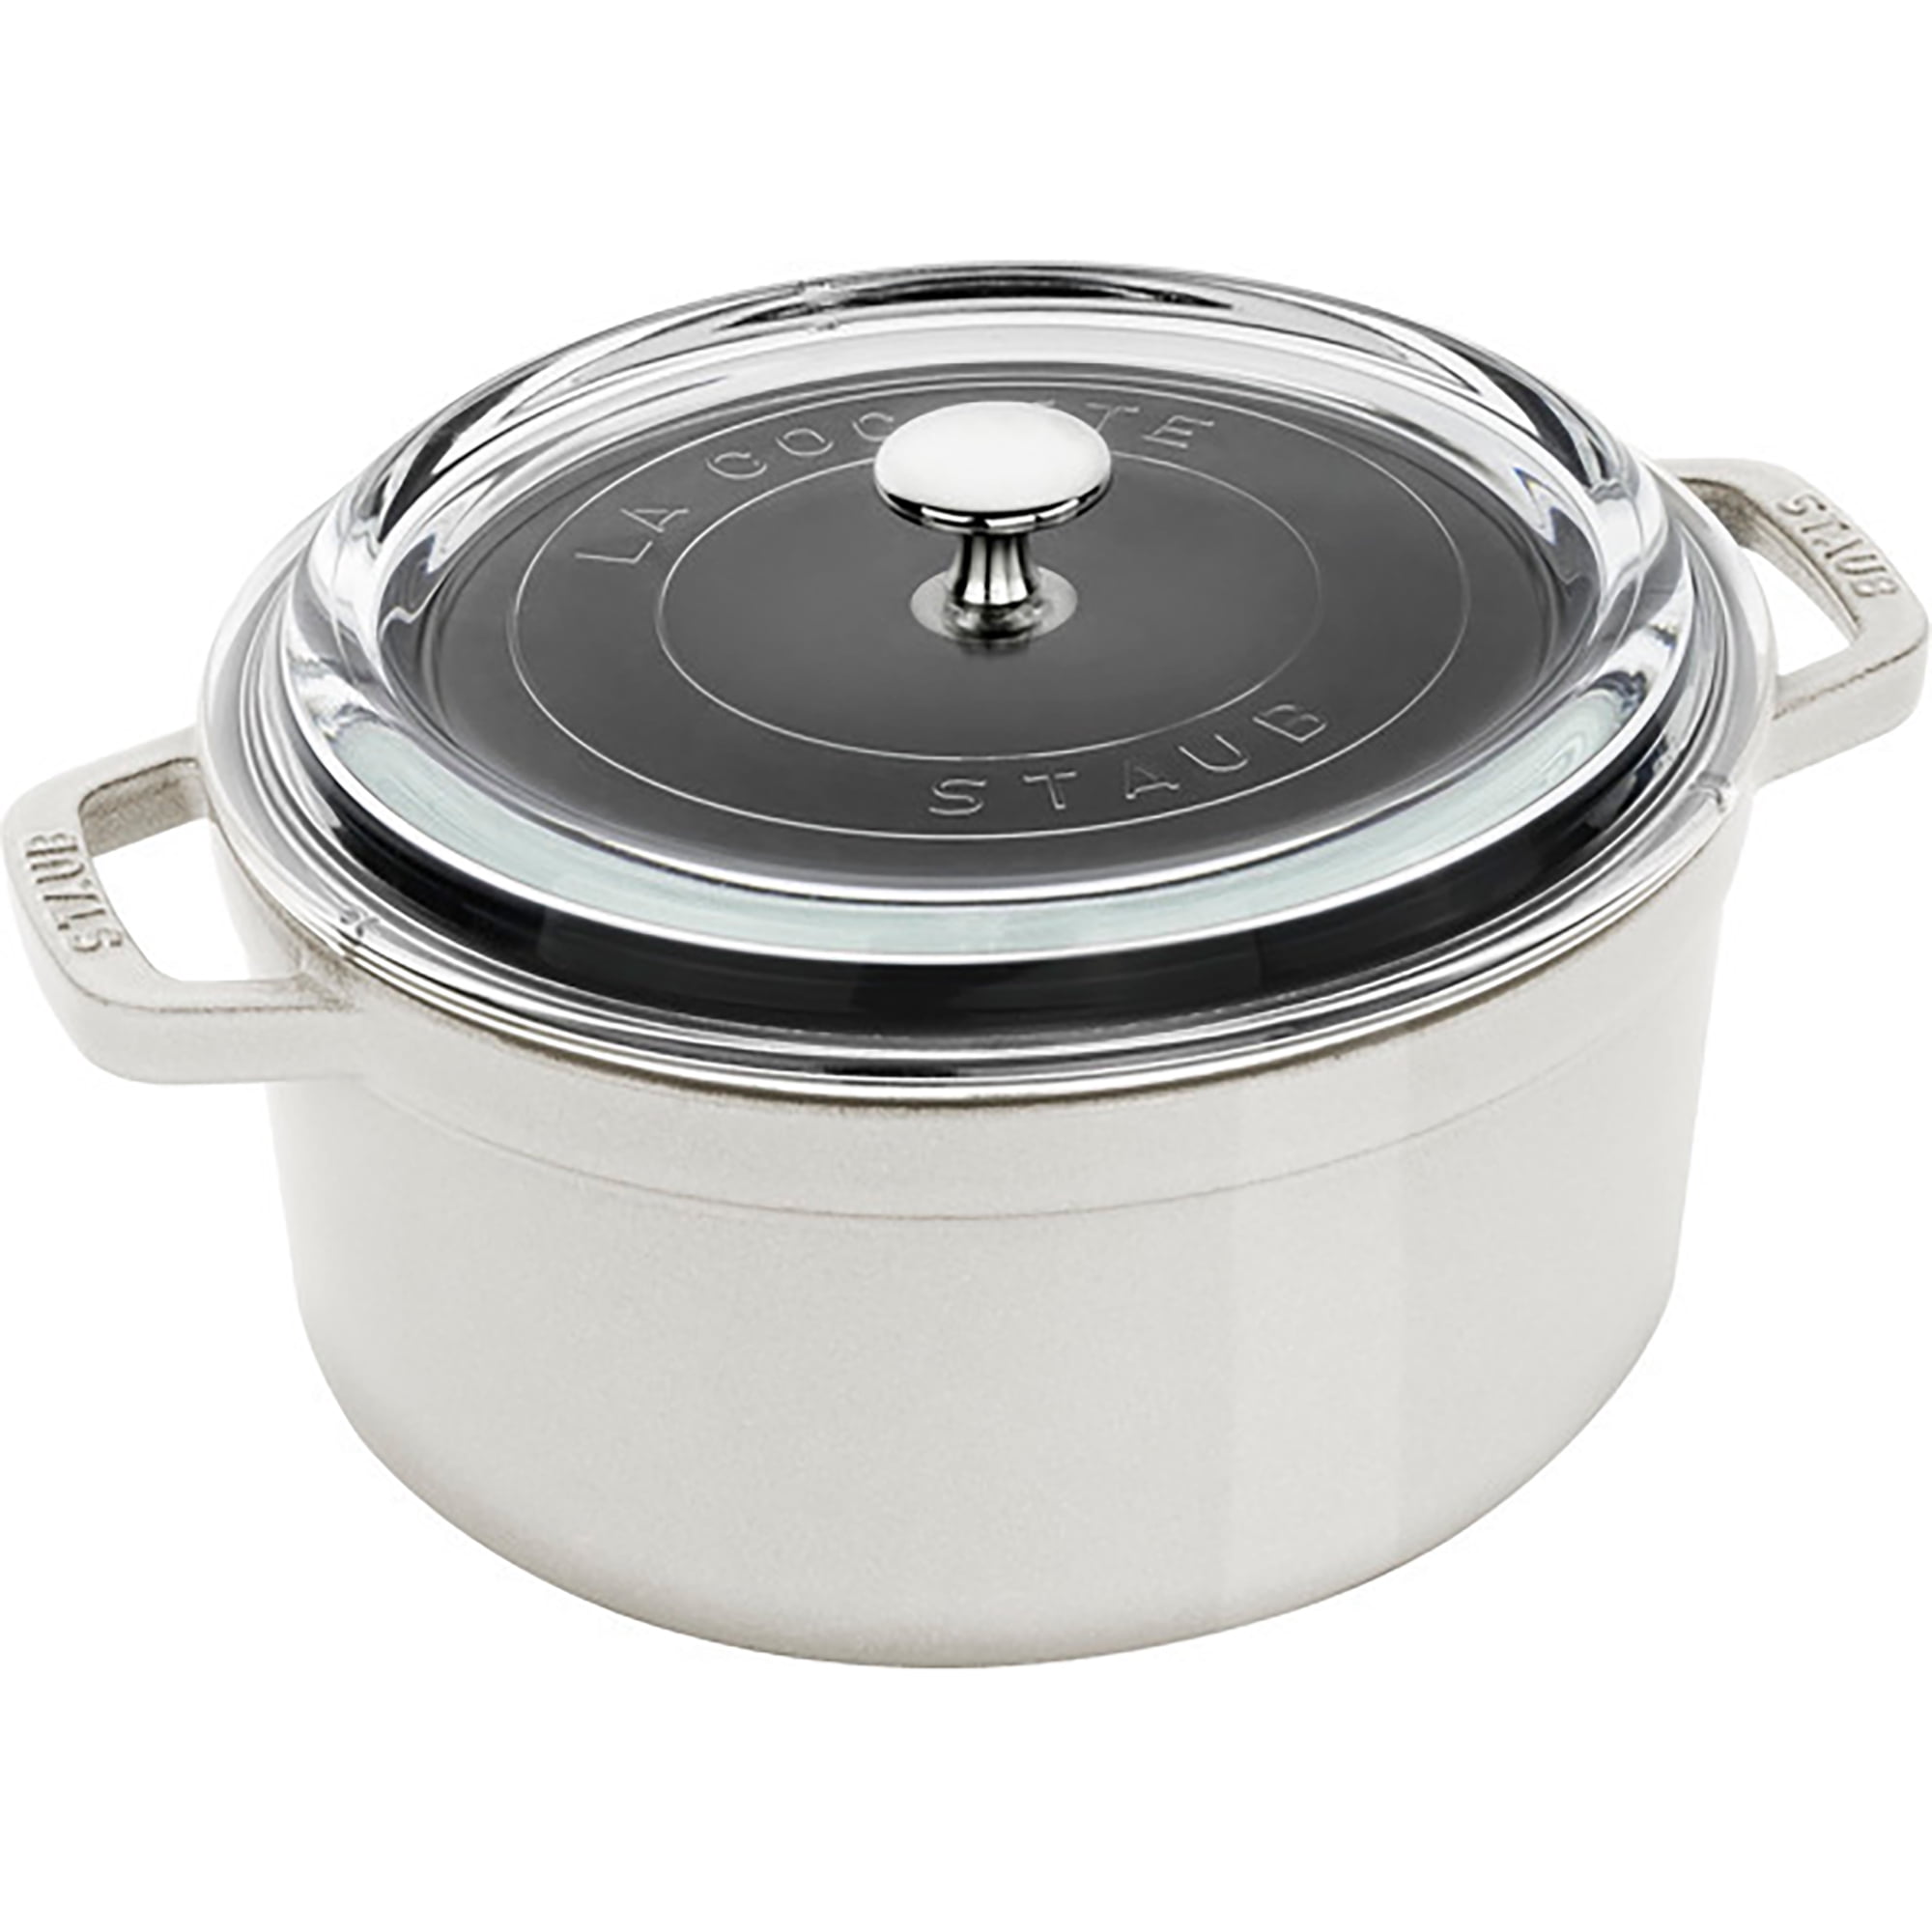 Staub Cast Iron 4-qt Round Cocotte with Glass Lid - Cherry